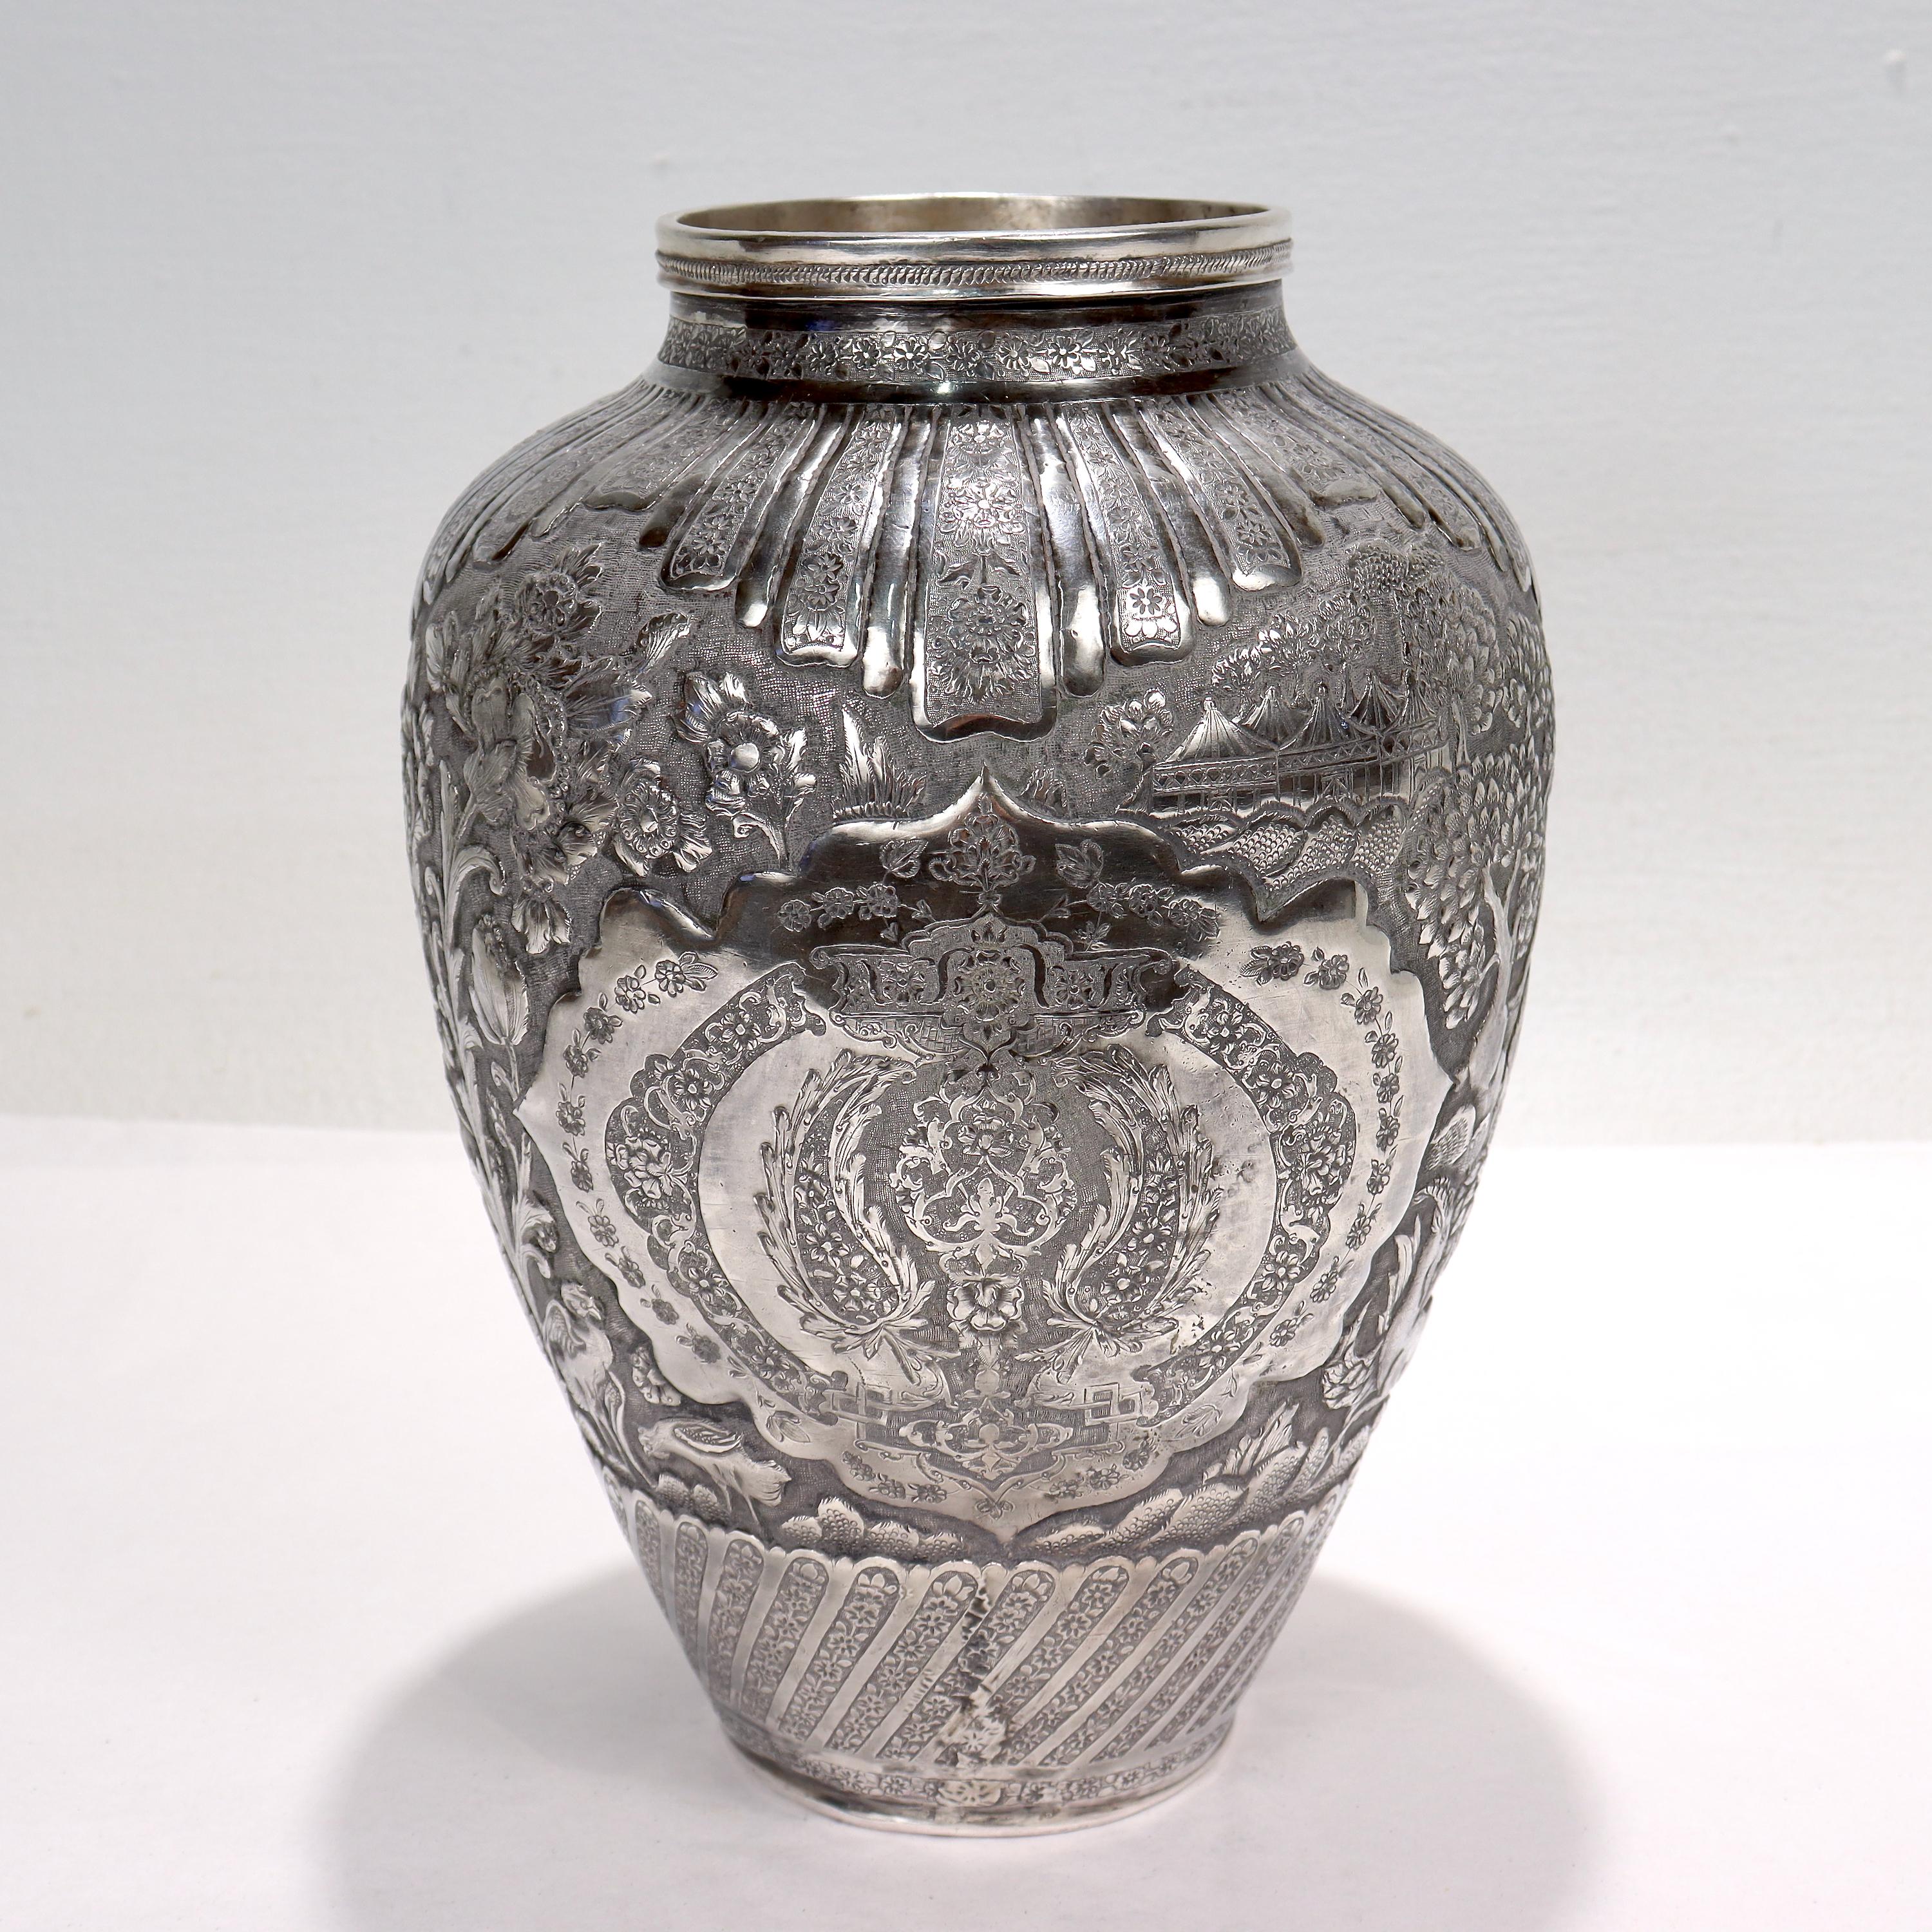 A fine old or antique Islamic silver vase.

Richly decorated with Ishafan (Eshafan) style repousse decoration throughout including gryphon heads, flowers & vines, birds of paradise, foliage, and Arabesque geometric decoration throughout. 

Signed to